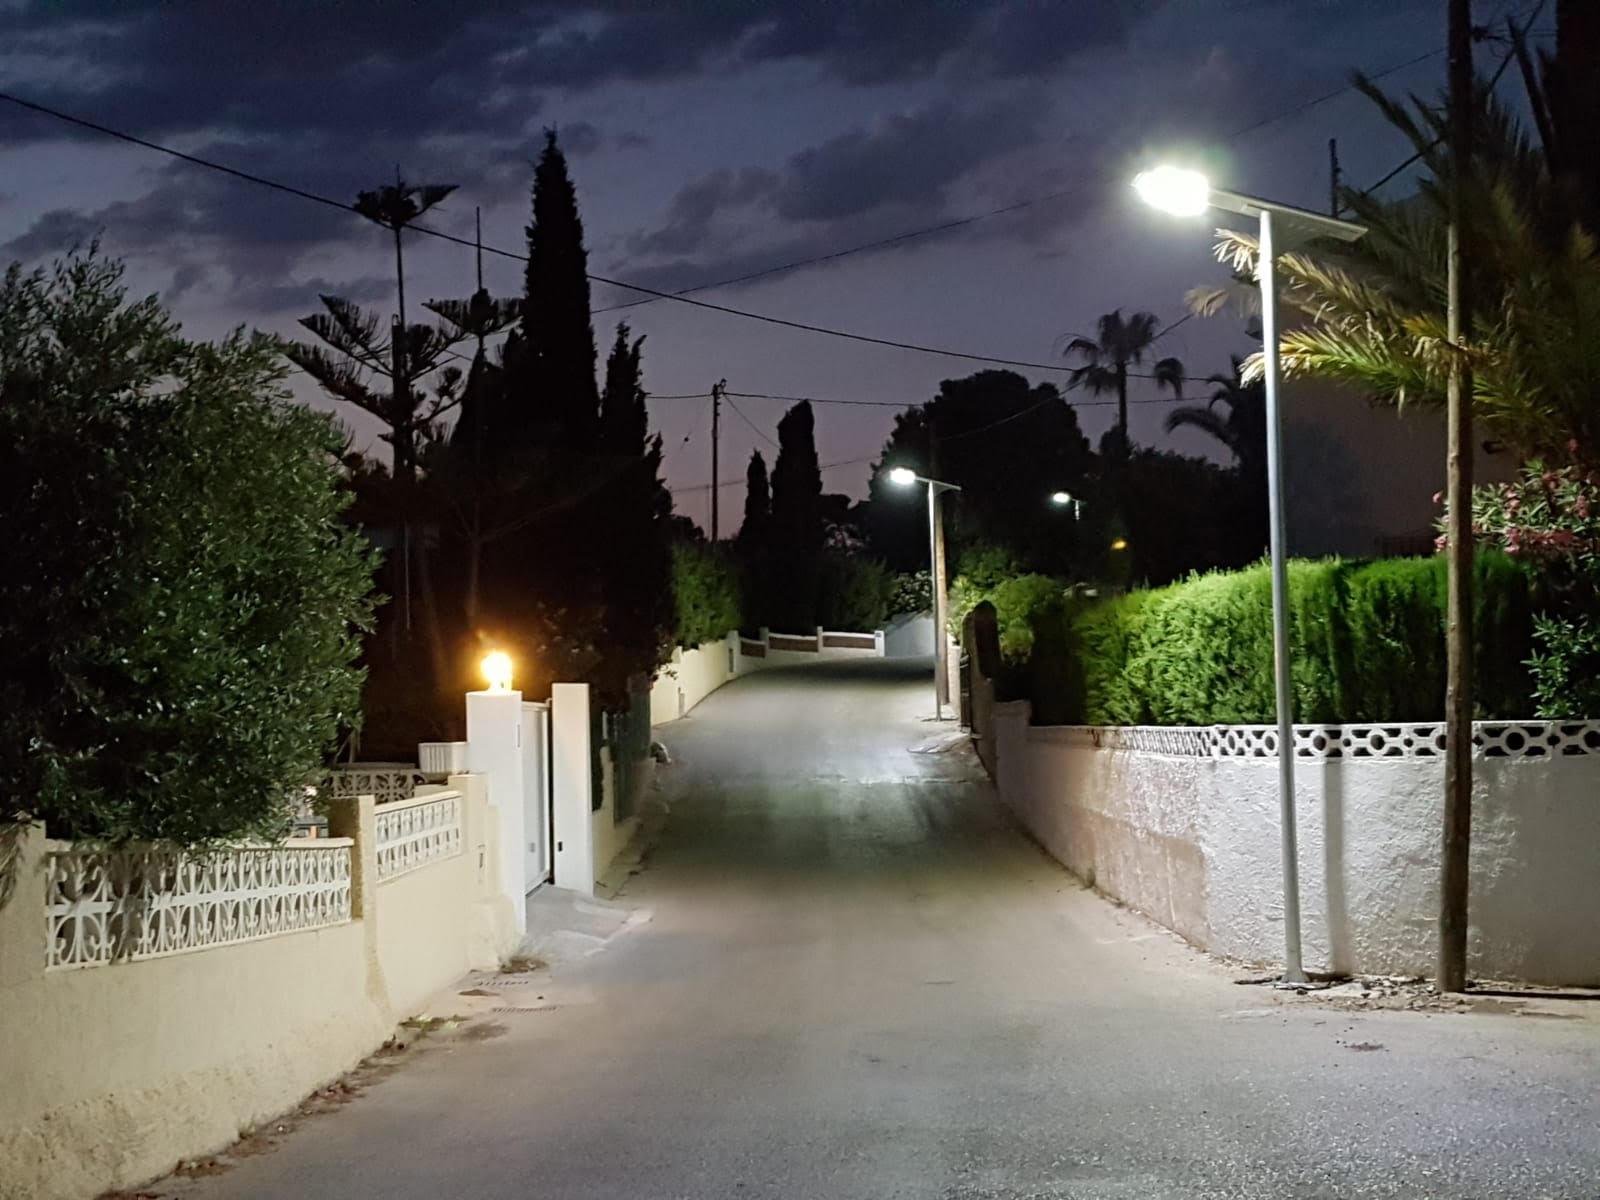 Things you need to know when you buy solar led street light